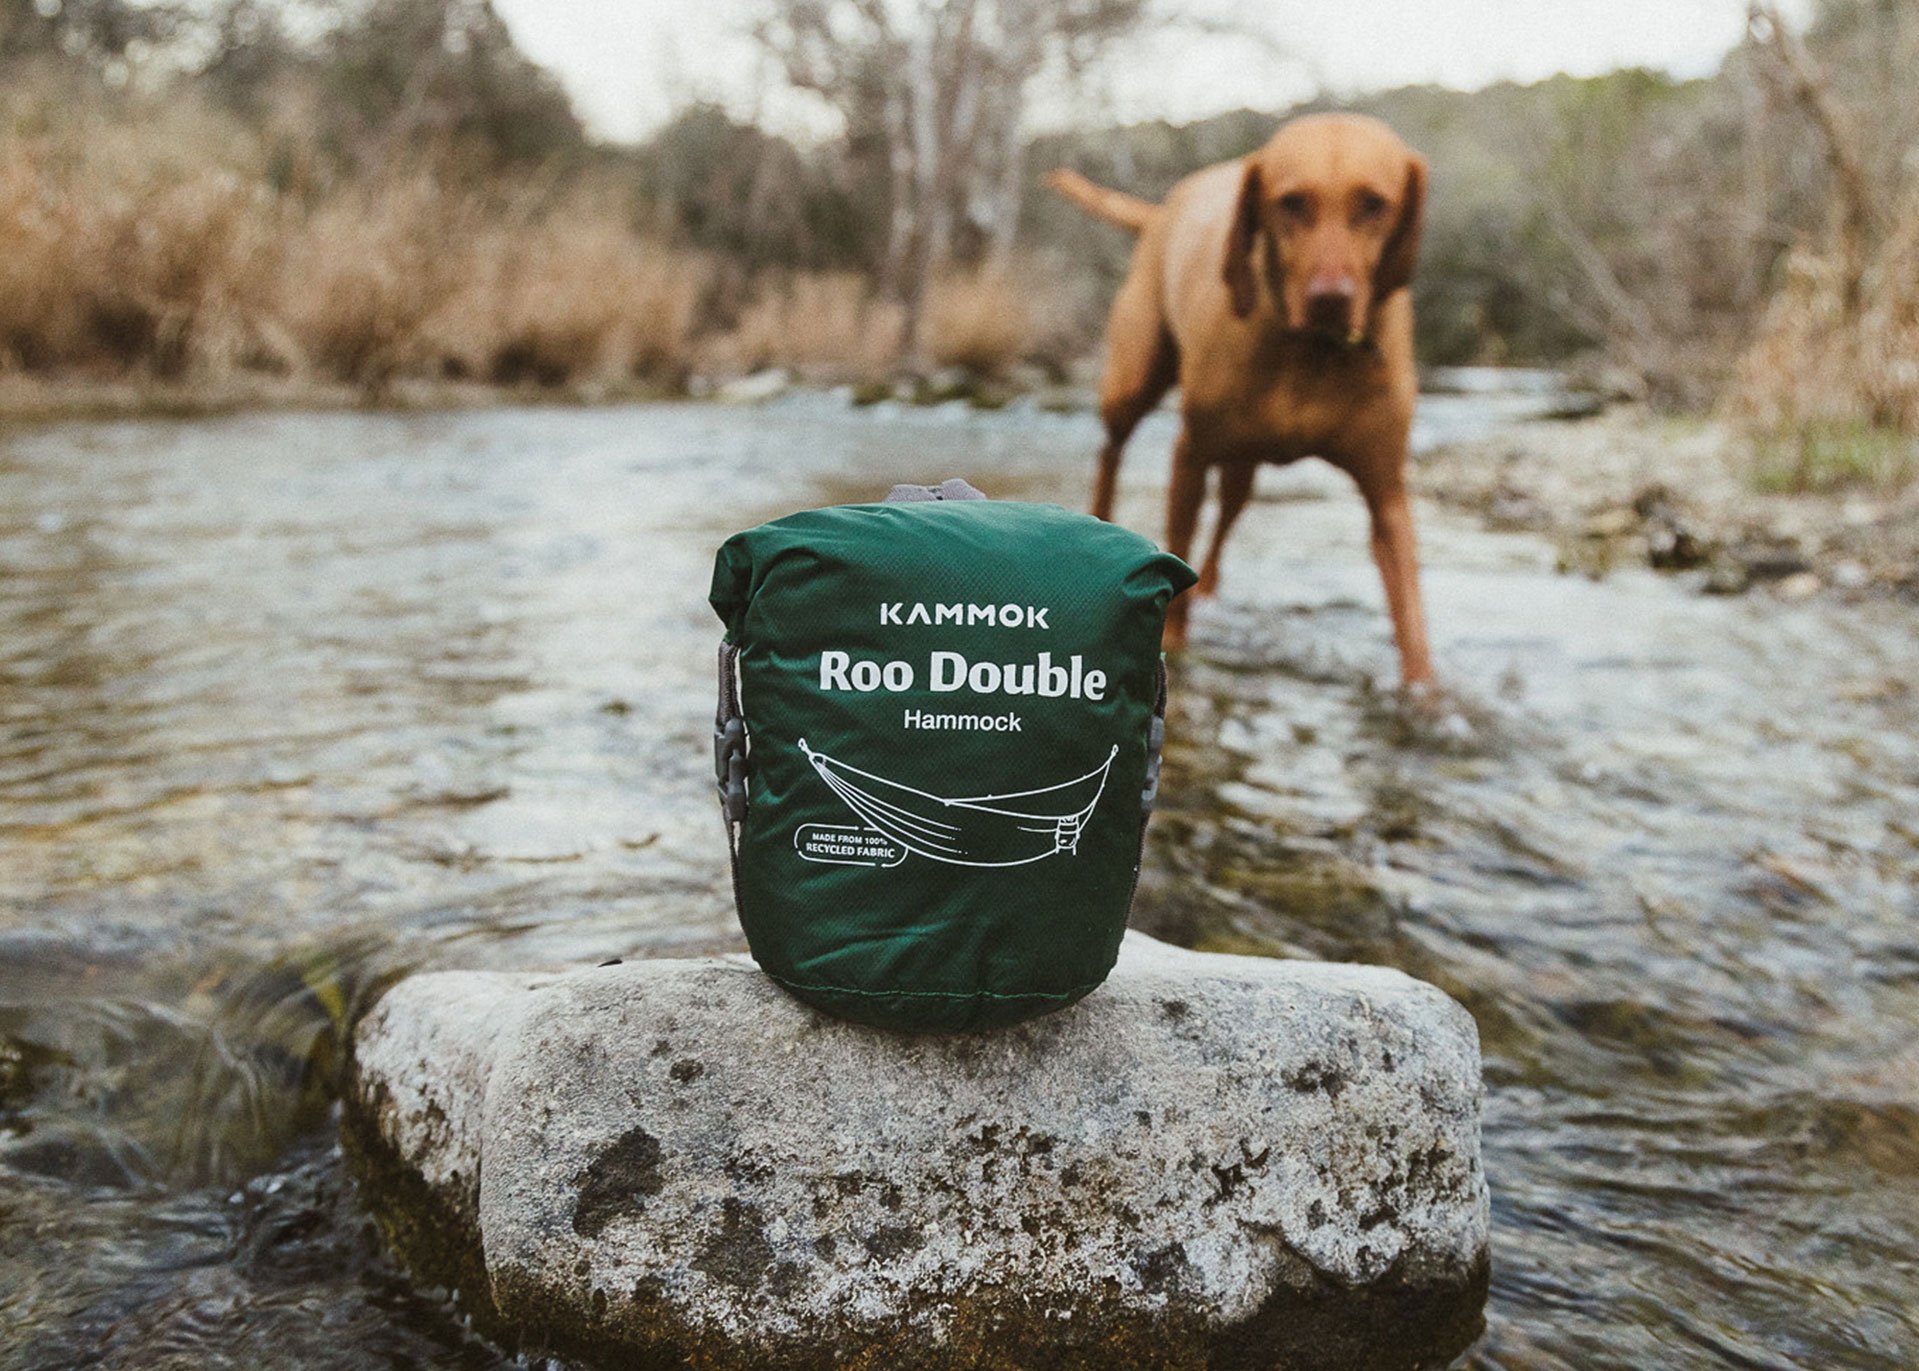 Kammok Roo Double, two person hammock, in water-resistant rolltop stuff sack on a rock in the river.